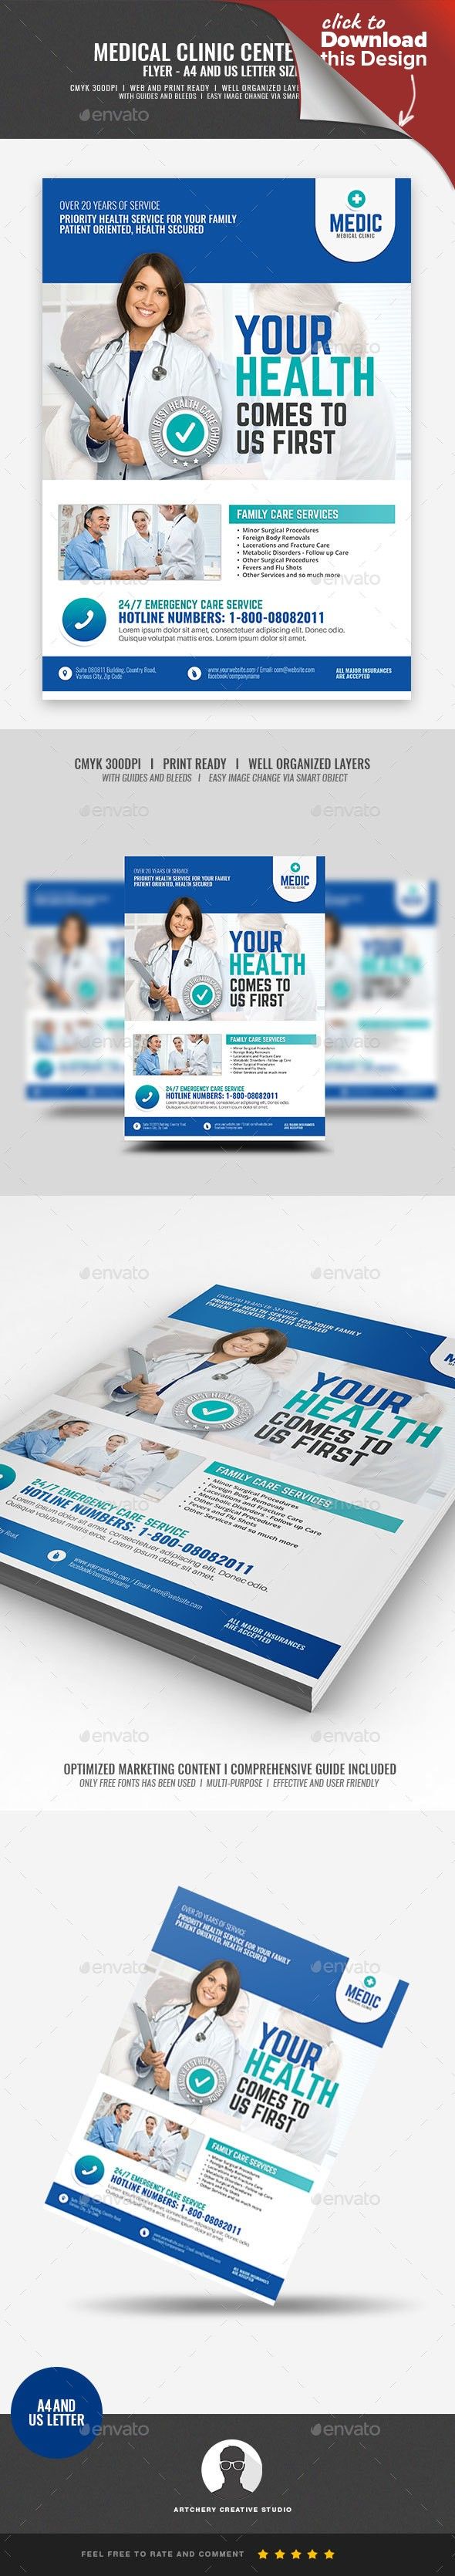 1548404924_359_Healthcare-Advertising-advertisement-blue-care-clean-clinic-cure-doctor-emergency-family-doctor Healthcare Advertising : advertisement, blue, care, clean, clinic, cure, doctor, emergency, family doctor...